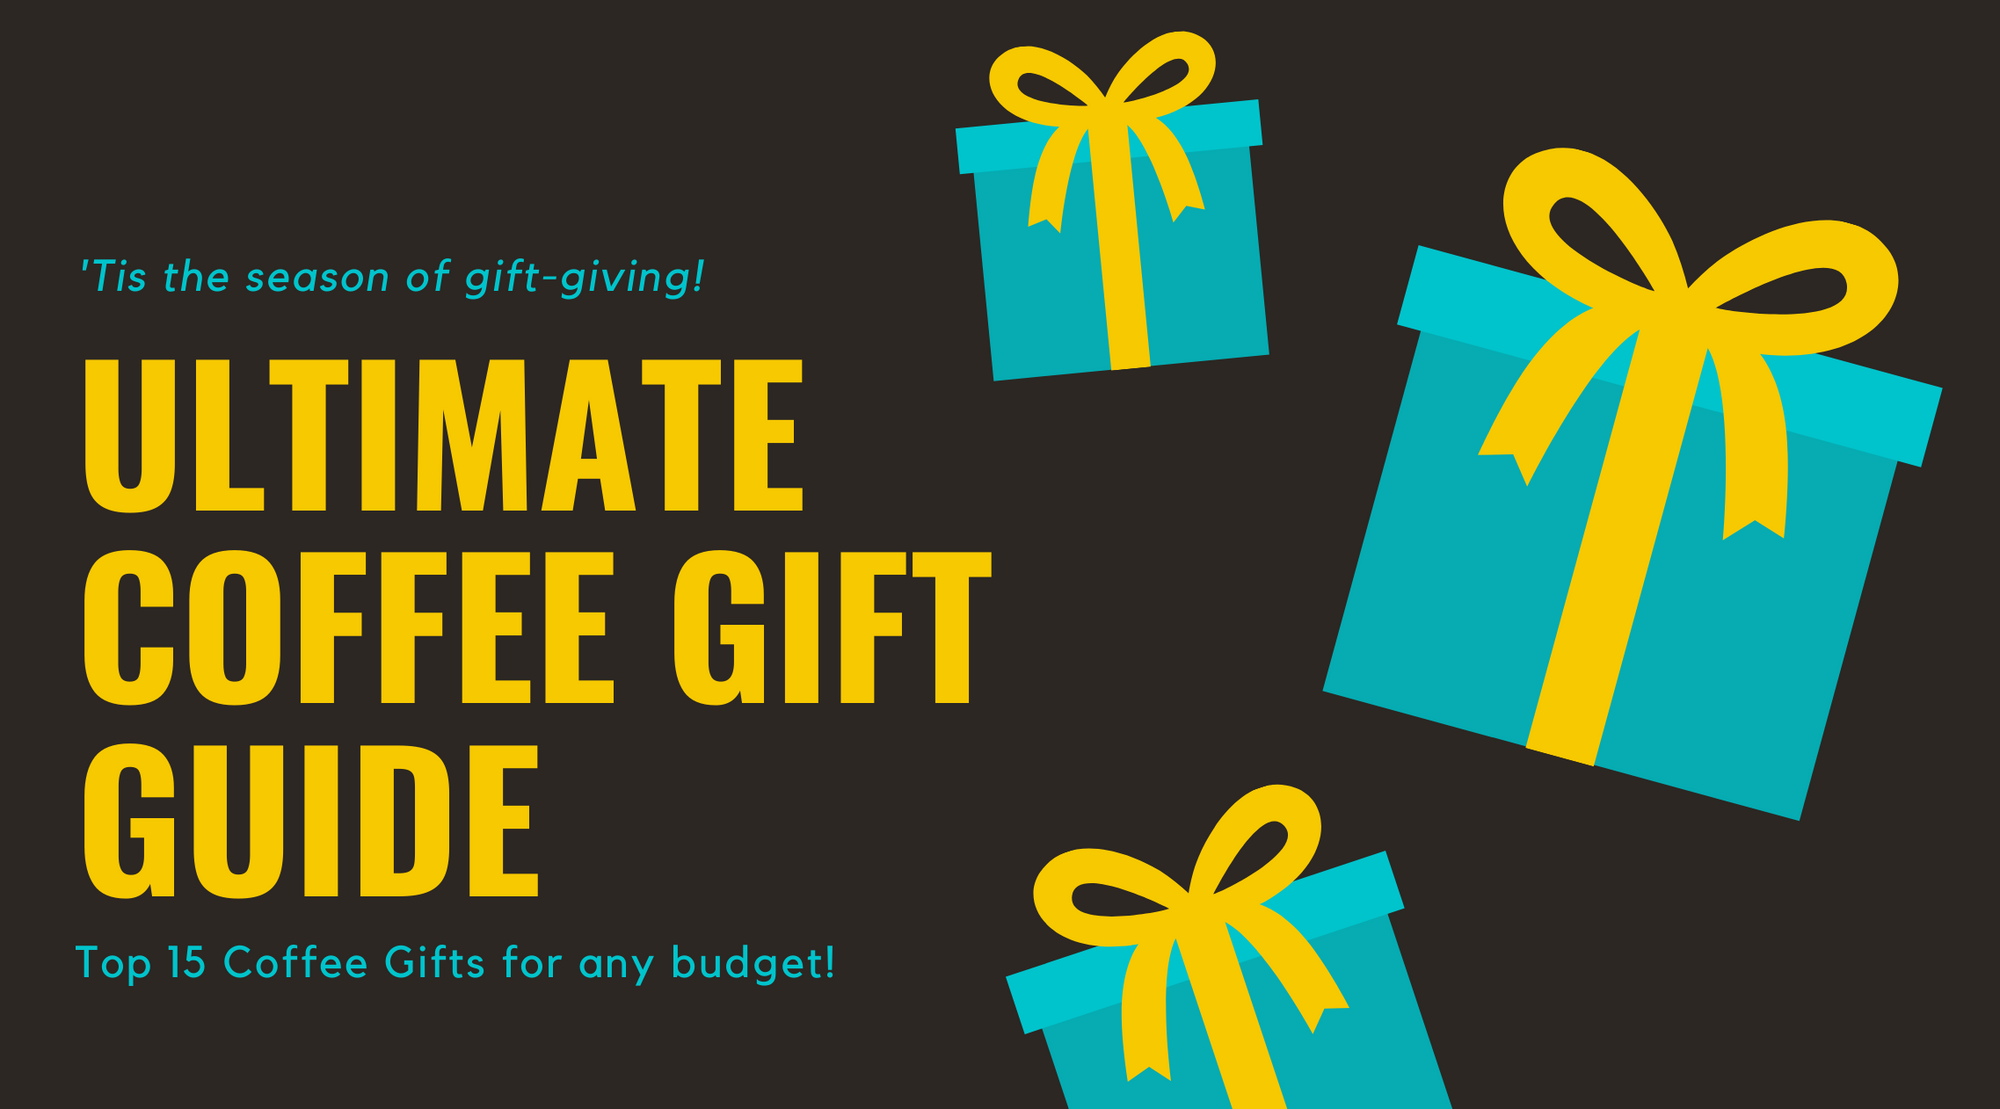 The ultimate gift giving guide for any budget